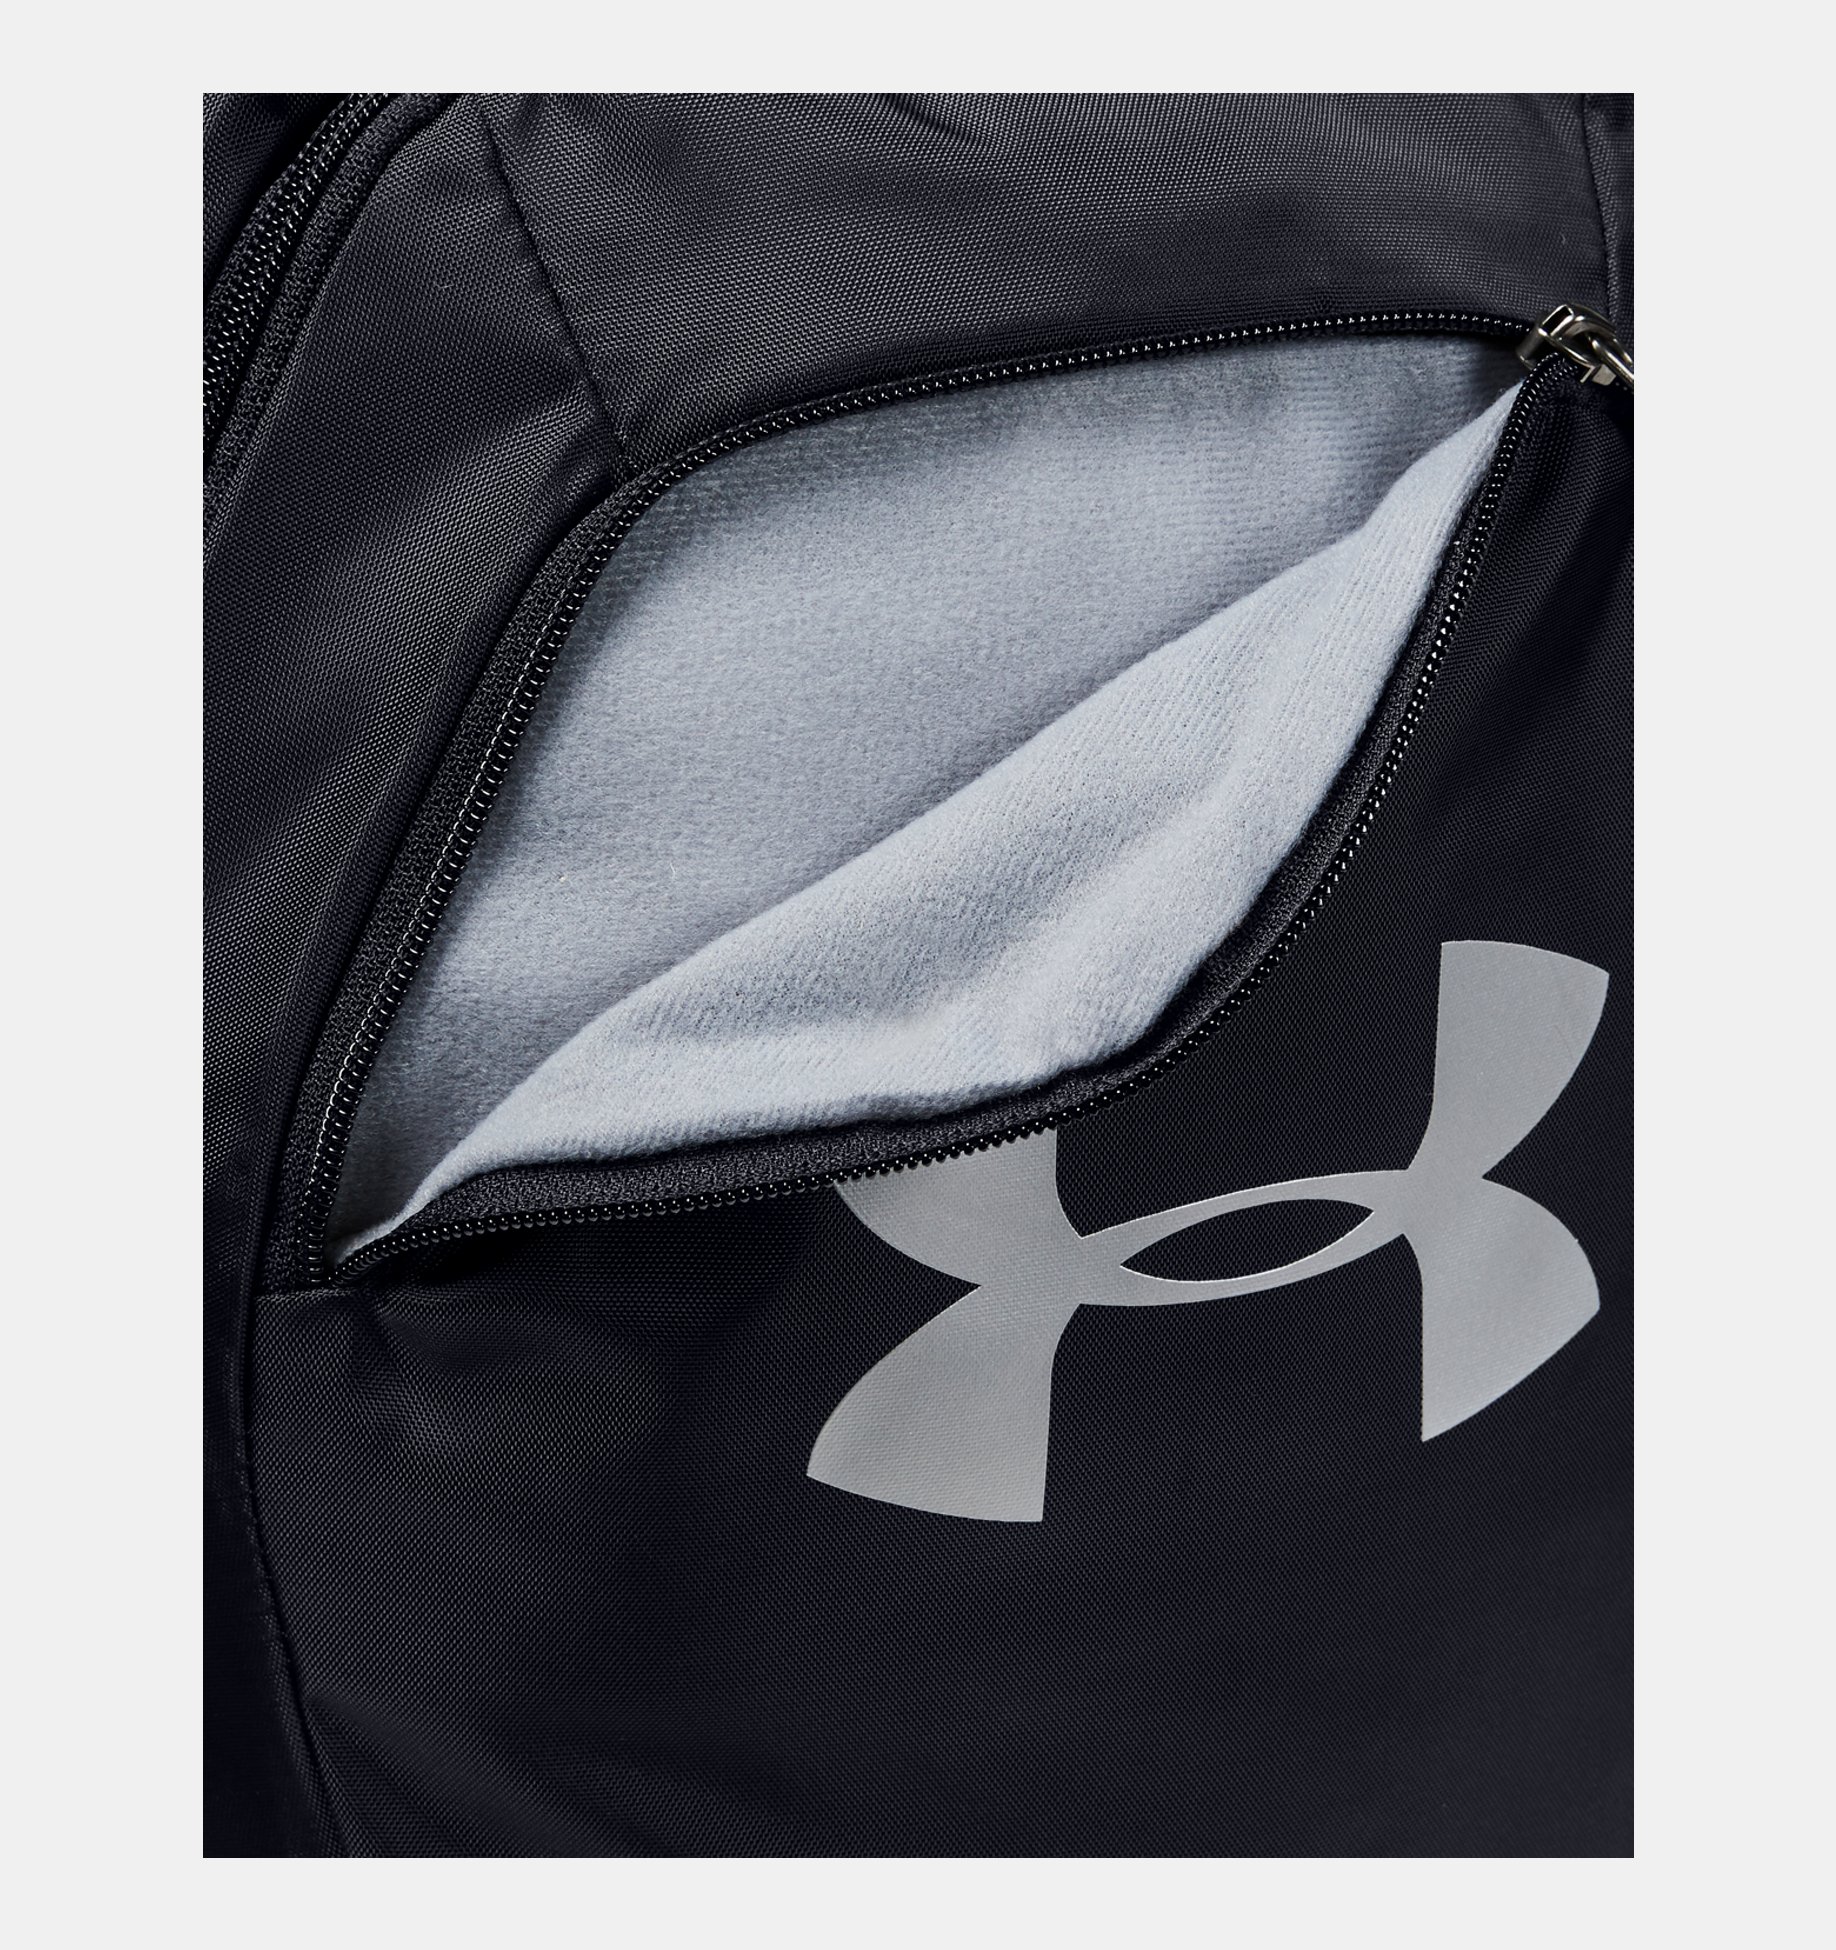 002 One Size Fits Most /Metallic Gold Visiter la boutique Under ArmourUnder Armour Adult Undeniable Sackpack Black 